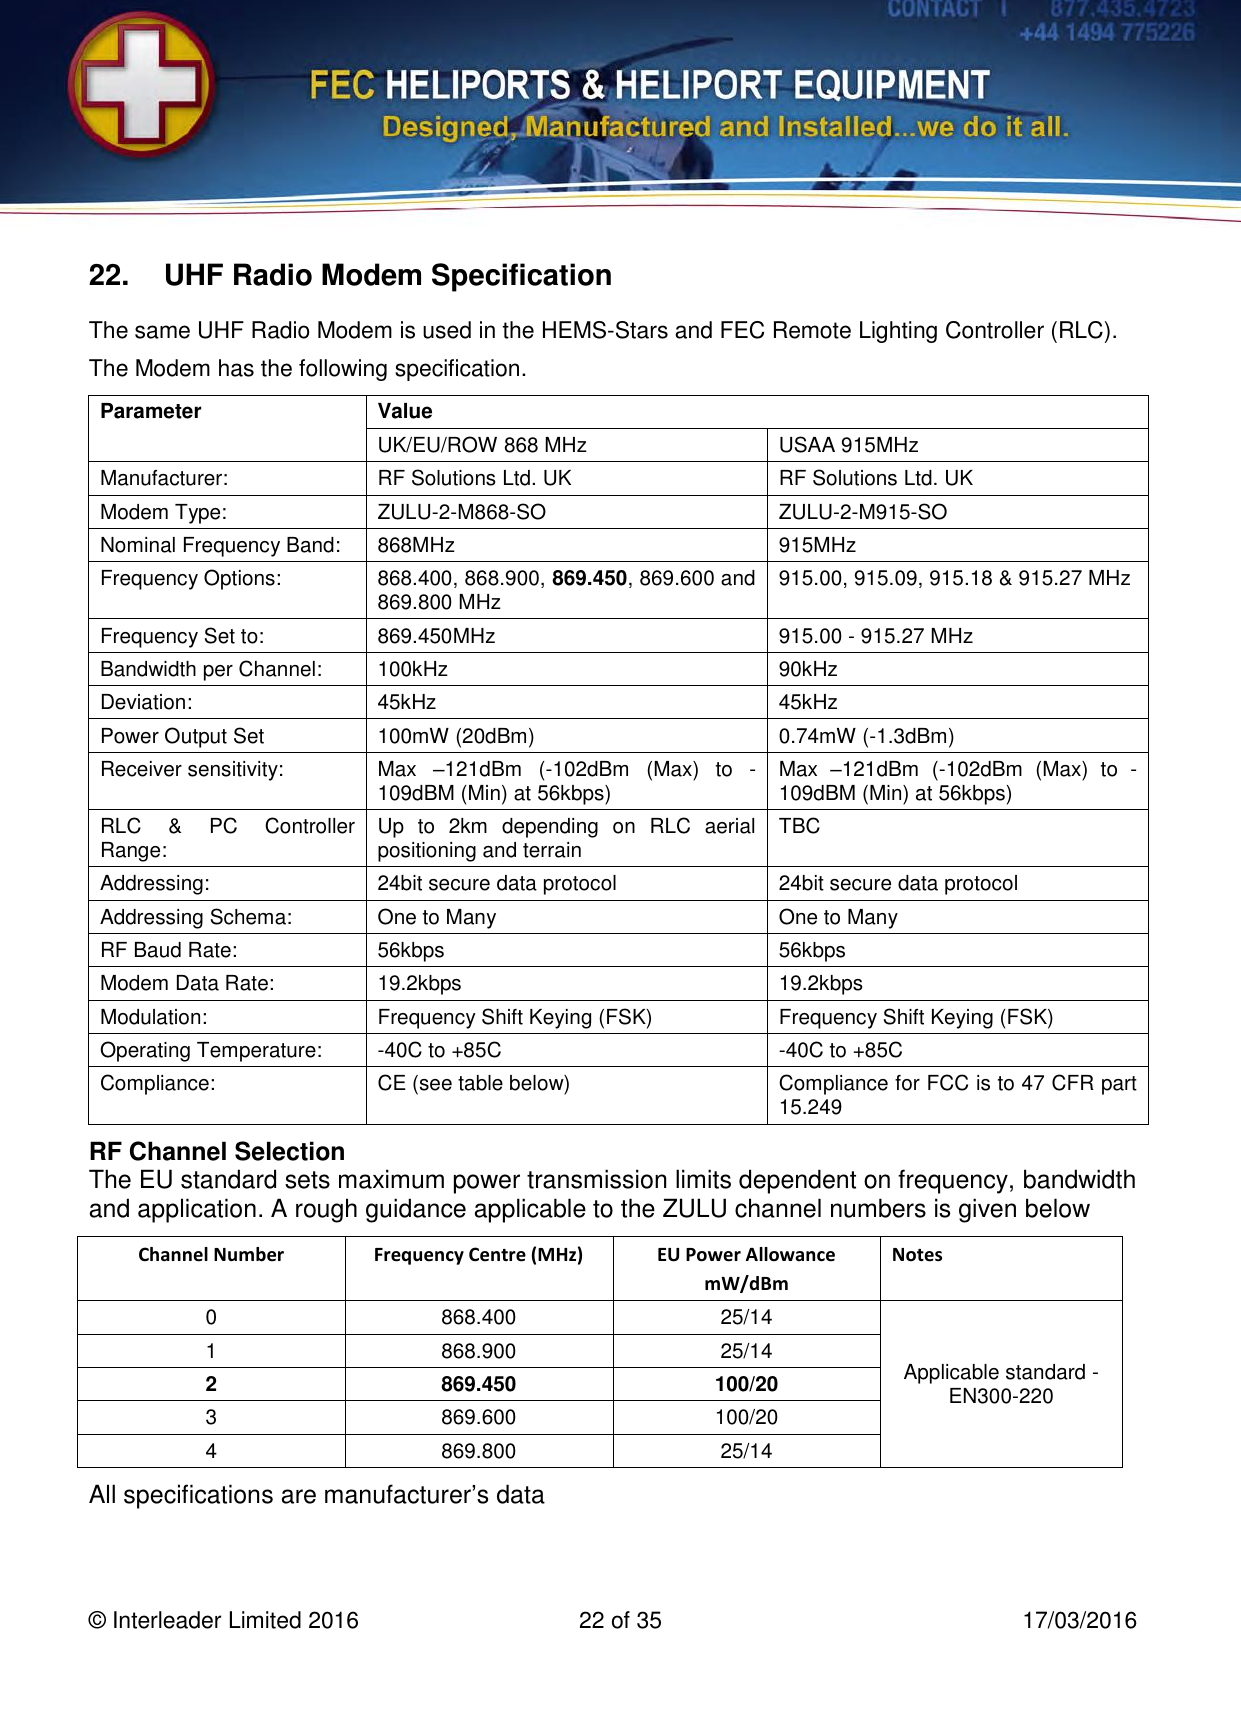   © Interleader Limited 2016  22 of 35  17/03/2016 22. UHF Radio Modem Specification The same UHF Radio Modem is used in the HEMS-Stars and FEC Remote Lighting Controller (RLC). The Modem has the following specification. Parameter Value UK/EU/ROW 868 MHz USAA 915MHz Manufacturer: RF Solutions Ltd. UK RF Solutions Ltd. UK Modem Type: ZULU-2-M868-SO  ZULU-2-M915-SO  Nominal Frequency Band: 868MHz 915MHz Frequency Options: 868.400, 868.900, 869.450, 869.600 and 869.800 MHz 915.00, 915.09, 915.18 &amp; 915.27 MHz Frequency Set to: 869.450MHz 915.00 - 915.27 MHz Bandwidth per Channel: 100kHz 90kHz Deviation: 45kHz 45kHz Power Output Set 100mW (20dBm) 0.74mW (-1.3dBm) Receiver sensitivity: Max  –121dBm  (-102dBm  (Max)  to  -109dBM (Min) at 56kbps) Max  –121dBm  (-102dBm  (Max)  to  -109dBM (Min) at 56kbps) RLC  &amp;  PC  Controller Range: Up  to  2km  depending  on  RLC  aerial positioning and terrain  TBC Addressing: 24bit secure data protocol 24bit secure data protocol Addressing Schema: One to Many One to Many RF Baud Rate:  56kbps 56kbps Modem Data Rate: 19.2kbps 19.2kbps Modulation: Frequency Shift Keying (FSK) Frequency Shift Keying (FSK) Operating Temperature: -40C to +85C -40C to +85C Compliance: CE (see table below) Compliance for FCC is to 47 CFR part 15.249 RF Channel Selection The EU standard sets maximum power transmission limits dependent on frequency, bandwidth and application. A rough guidance applicable to the ZULU channel numbers is given below  Channel Number Frequency Centre (MHz) EU Power Allowance mW/dBm Notes 0 868.400 25/14 Applicable standard - EN300-220 1 868.900 25/14 2 869.450 100/20 3 869.600 100/20 4 869.800 25/14 All specifications are manufacturer’s data 